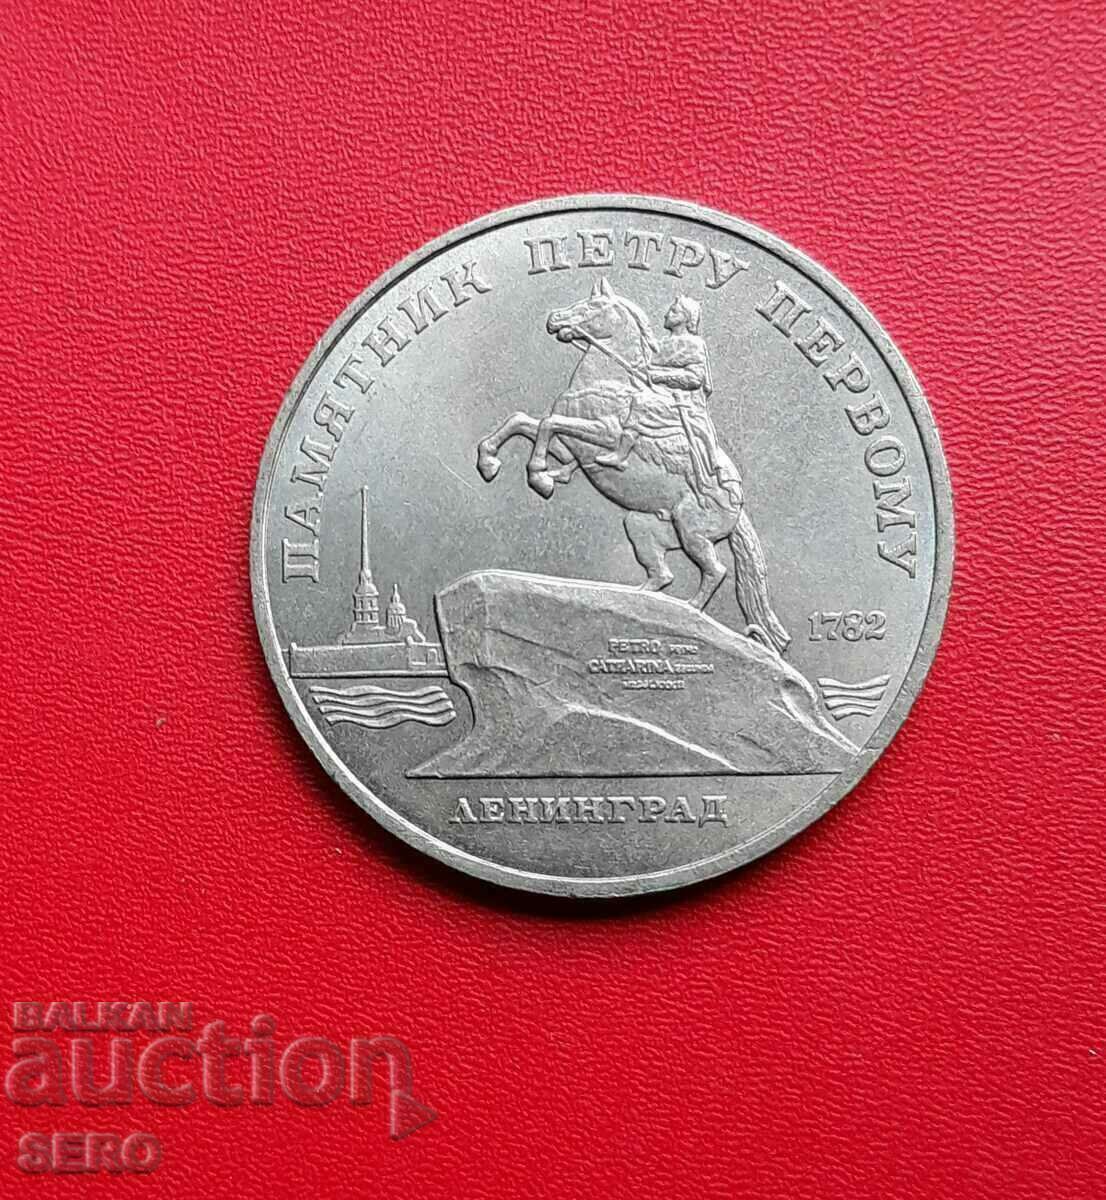 Russia-USSR-5 rubles 1988-Peter I